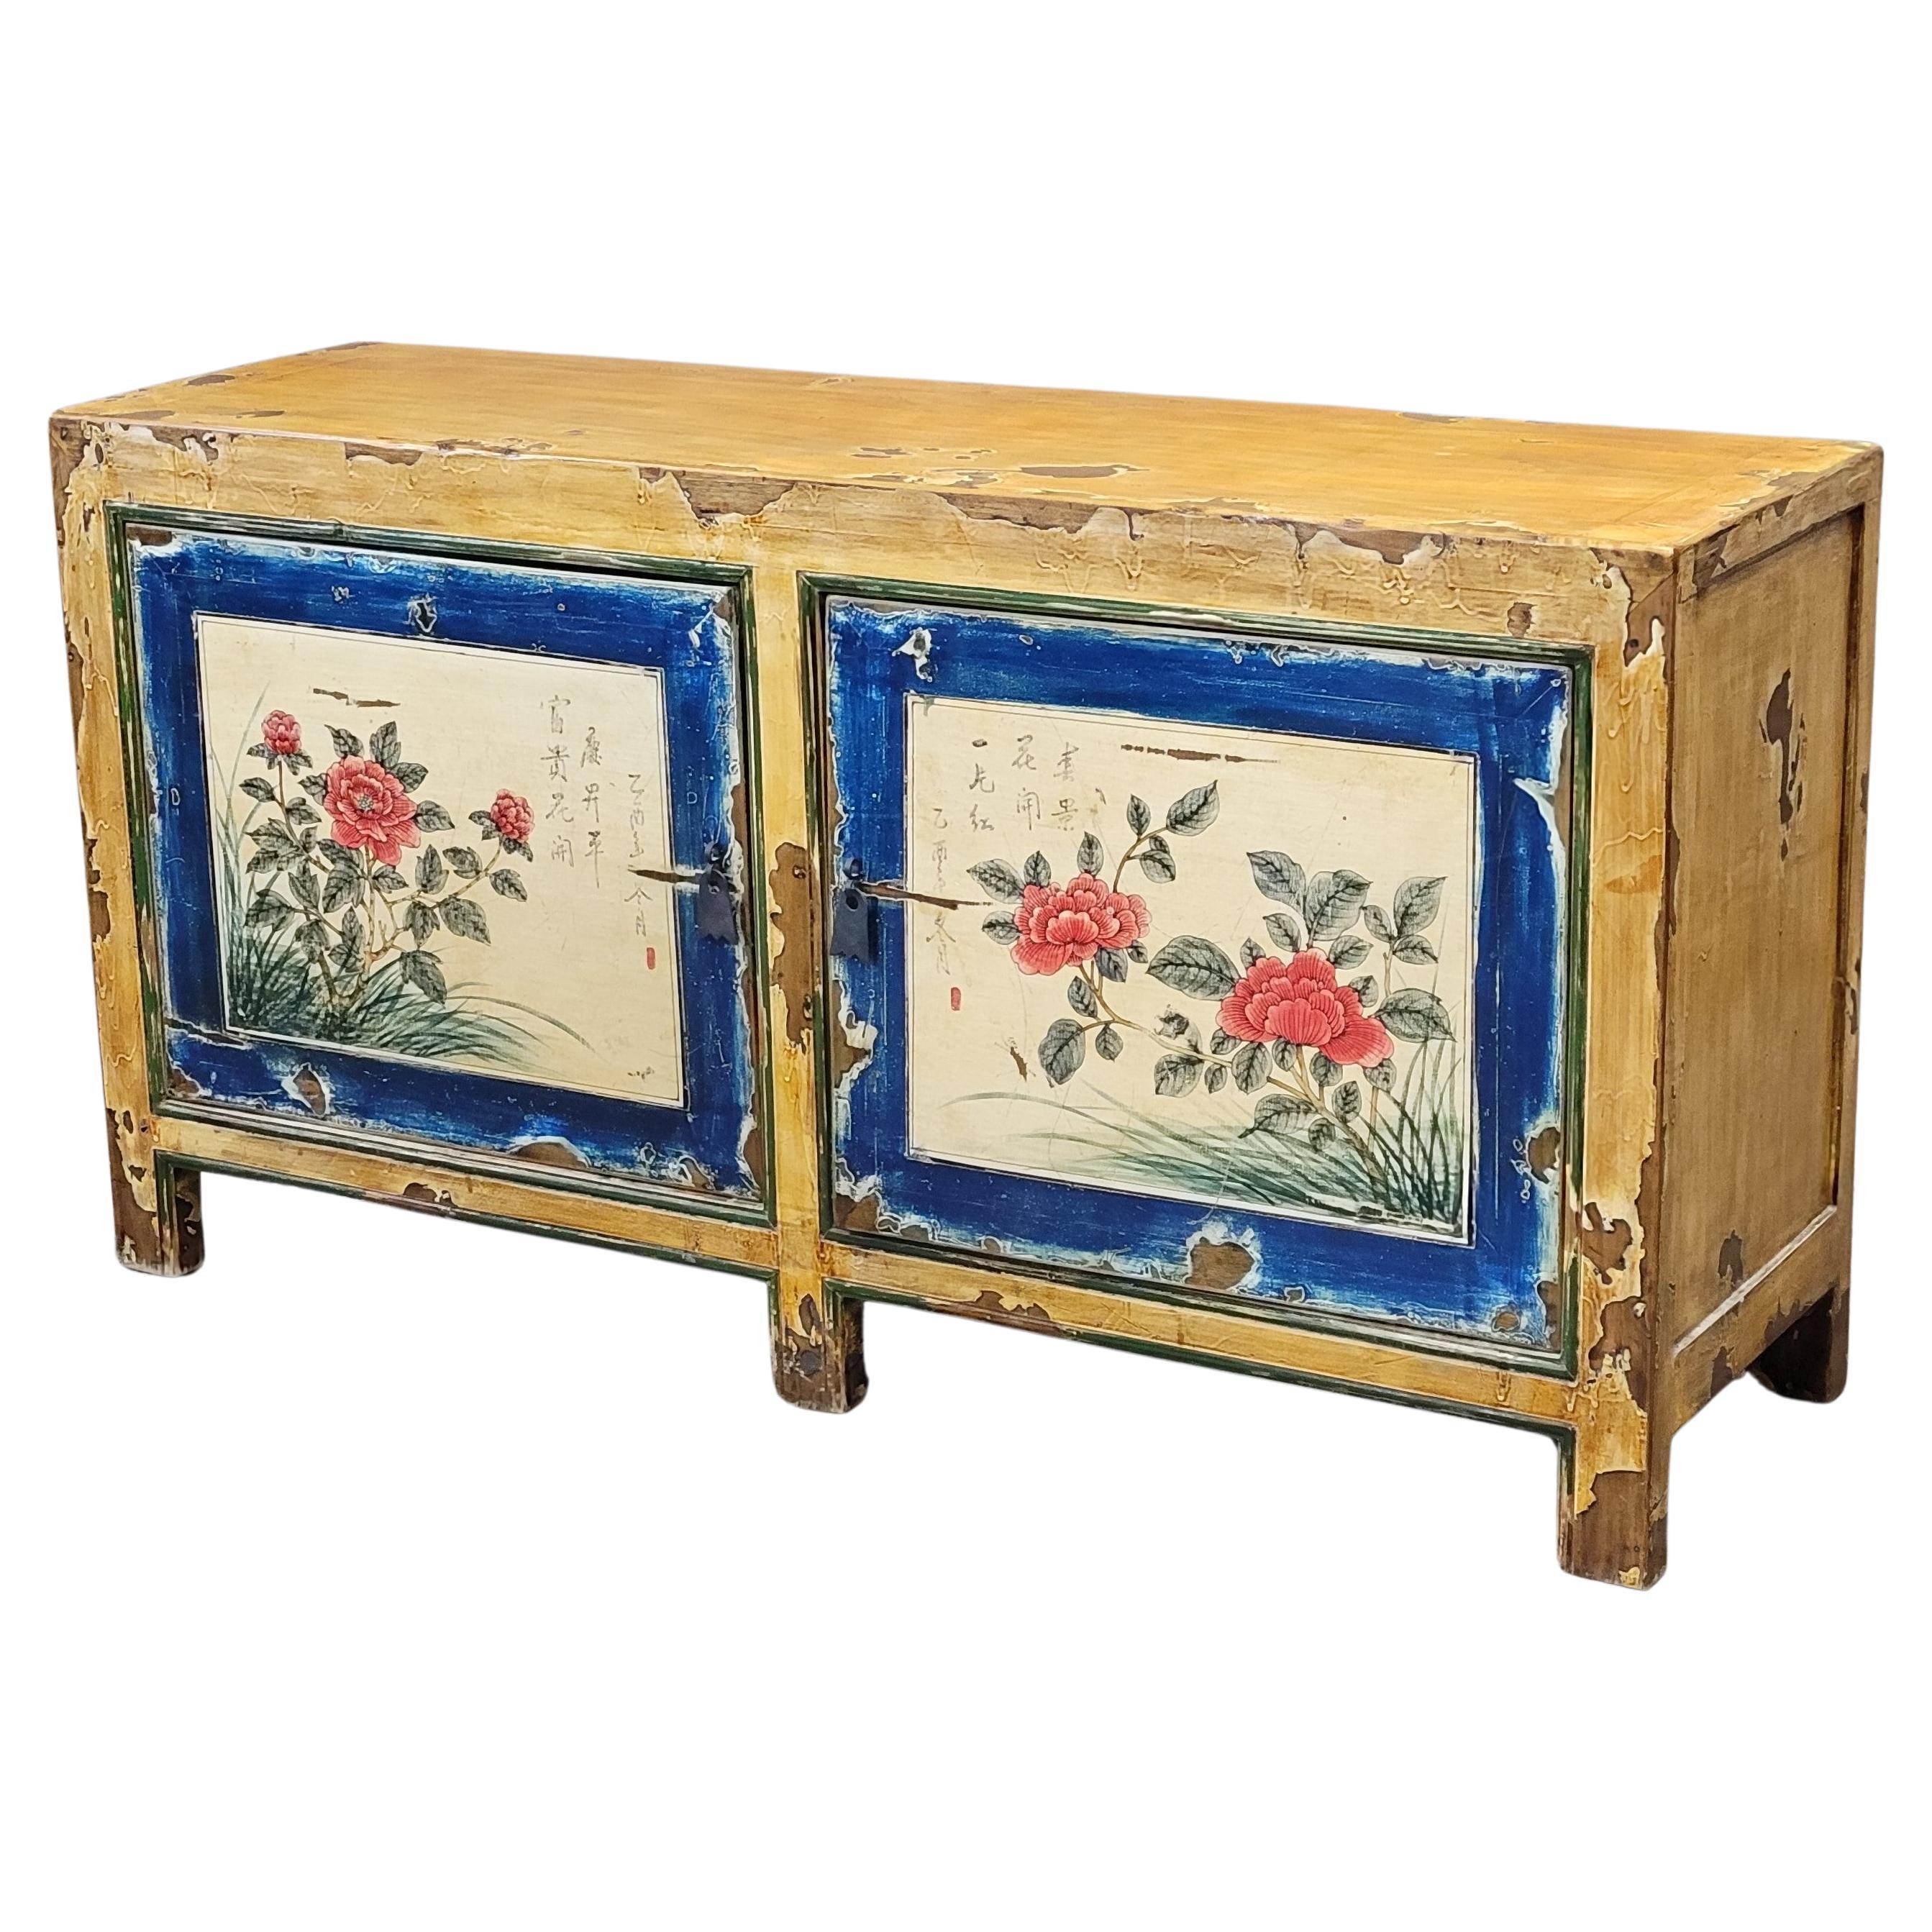 Vintage Chinese Distressed Lacquer Storage Cabinet Console With Floral Motif For Sale